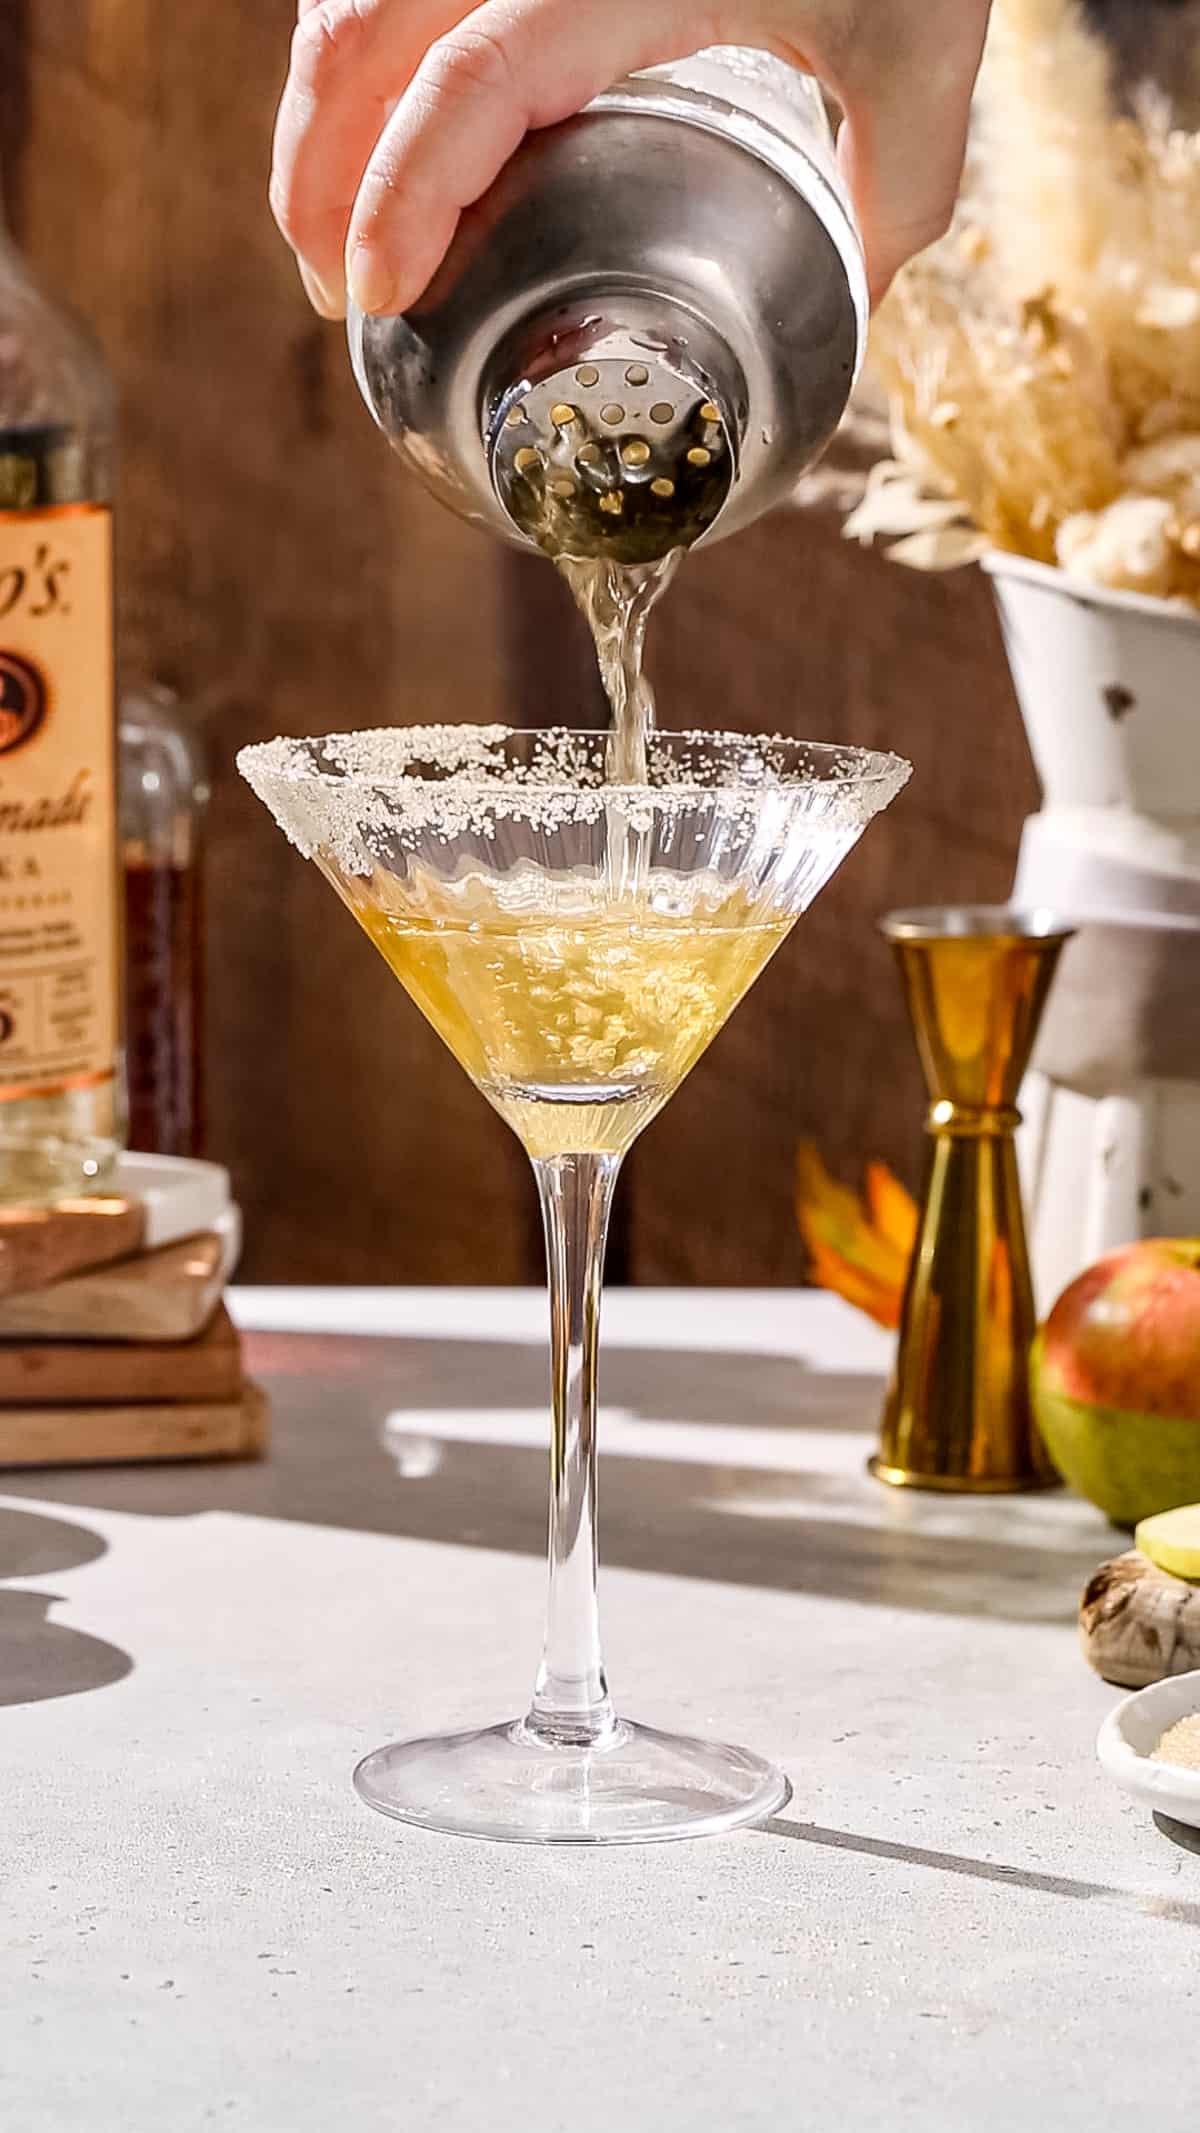 Hand straining a cocktail into a cocktail glass with a cinnamon sugar rim.